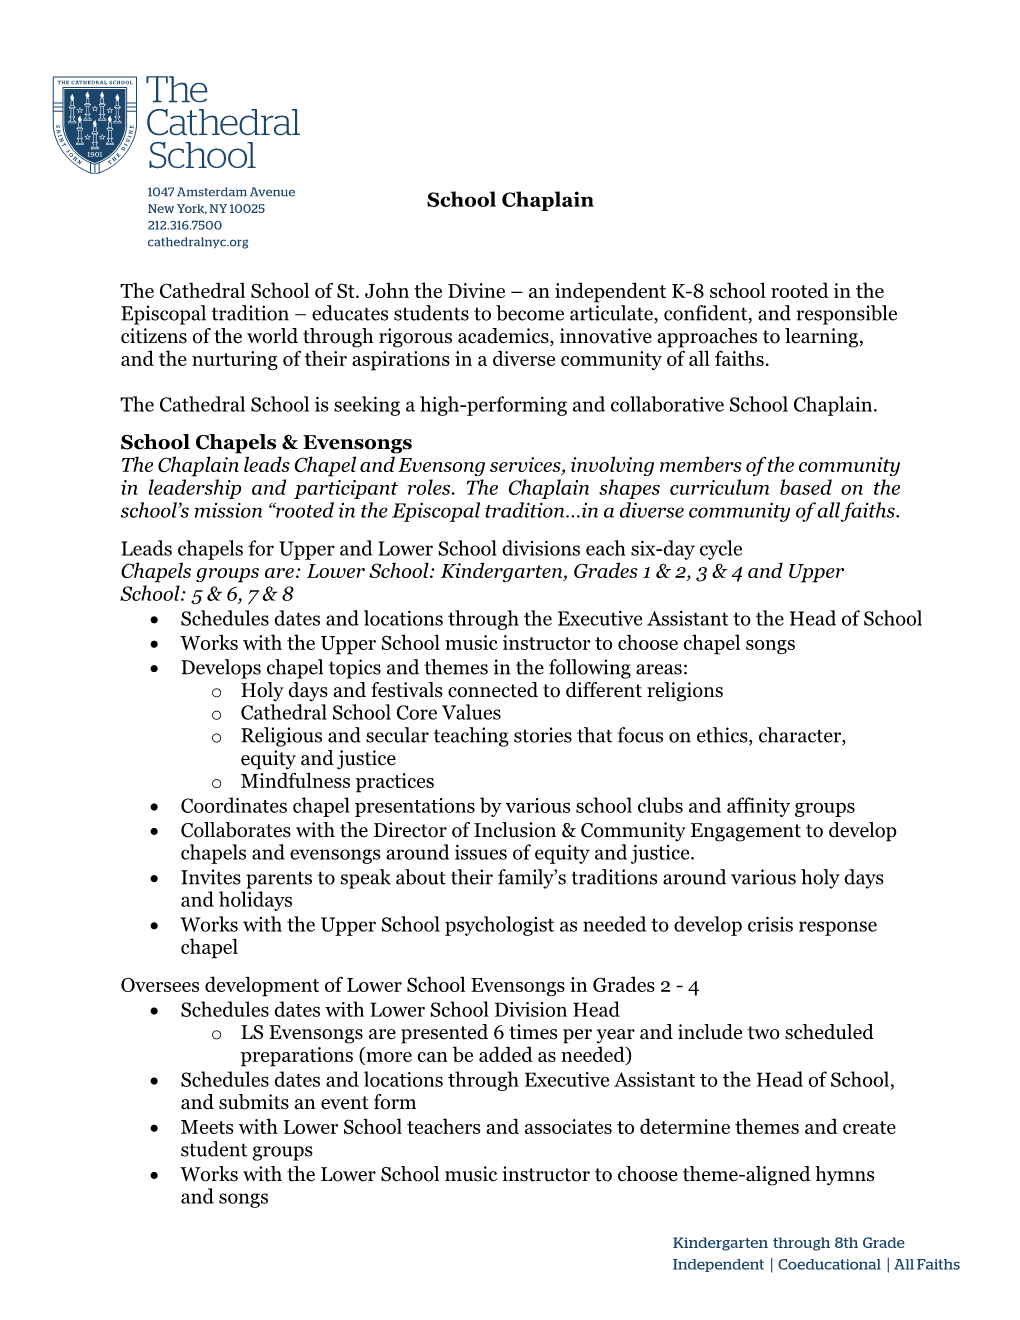 School Chaplain the Cathedral School of St. John the Divine – An